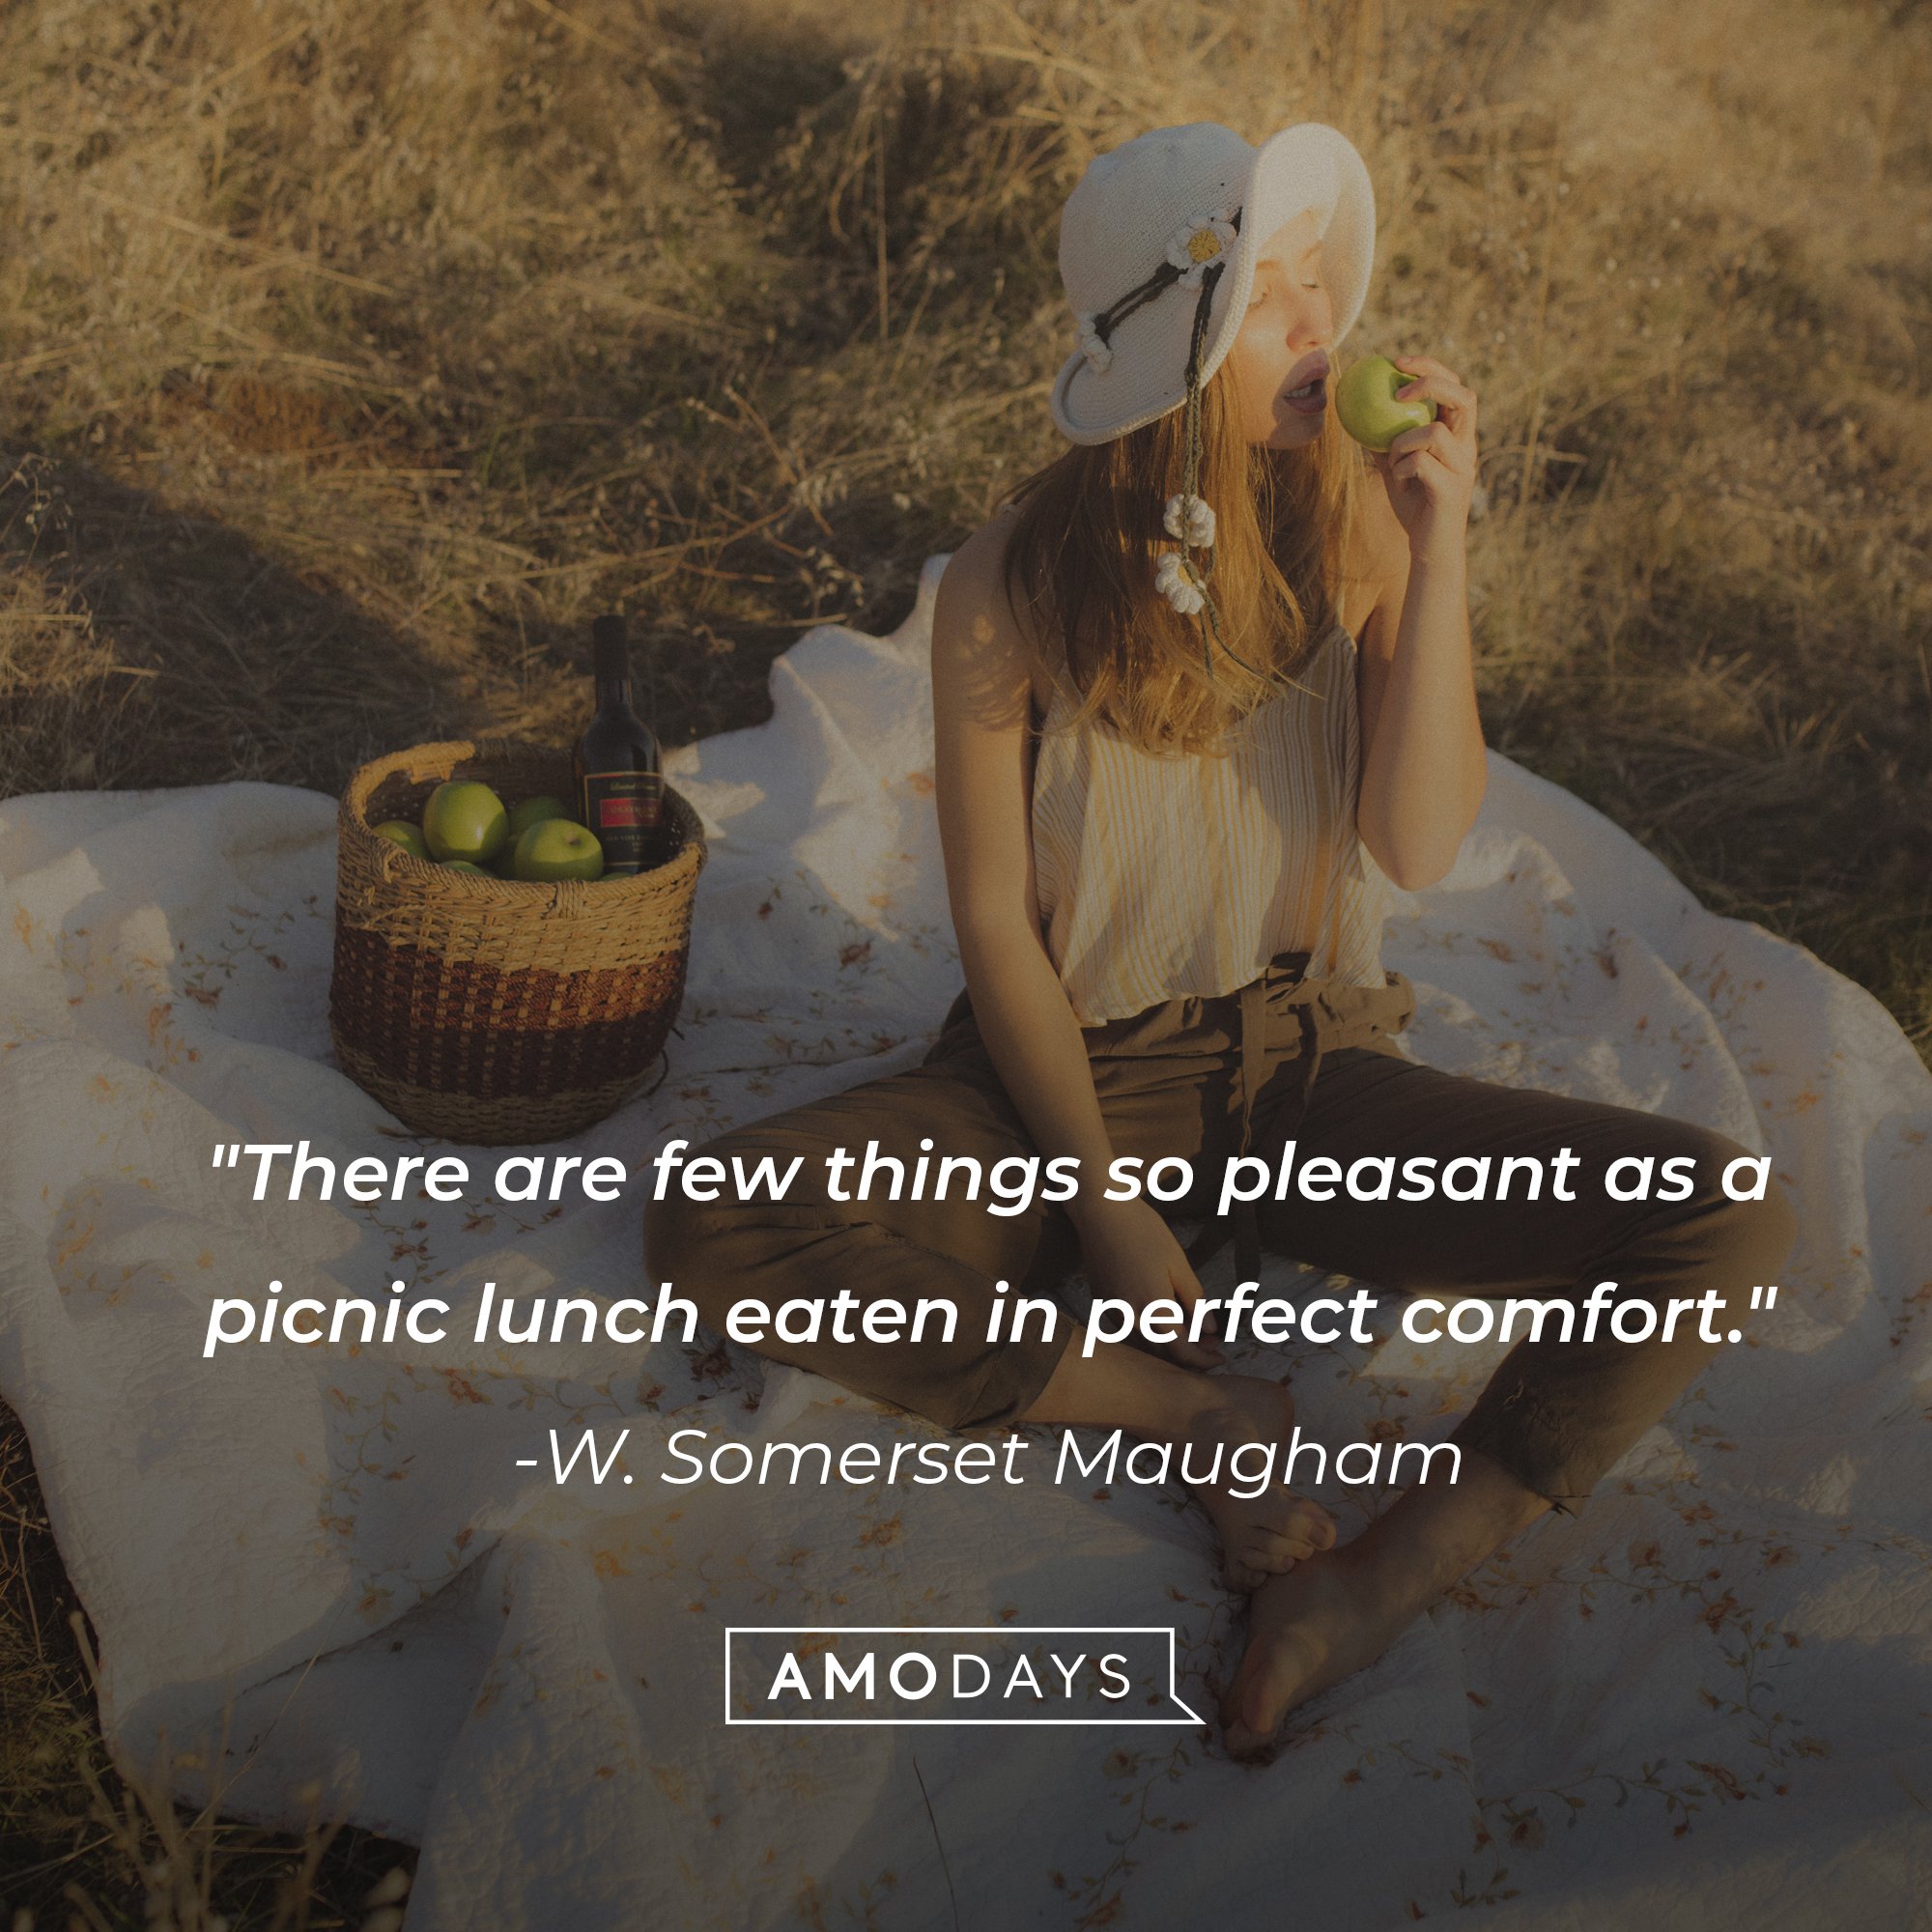 W. Somerset Maugham's quote: "There are few things so pleasant as a picnic lunch eaten in perfect comfort." | Image: AmoDays